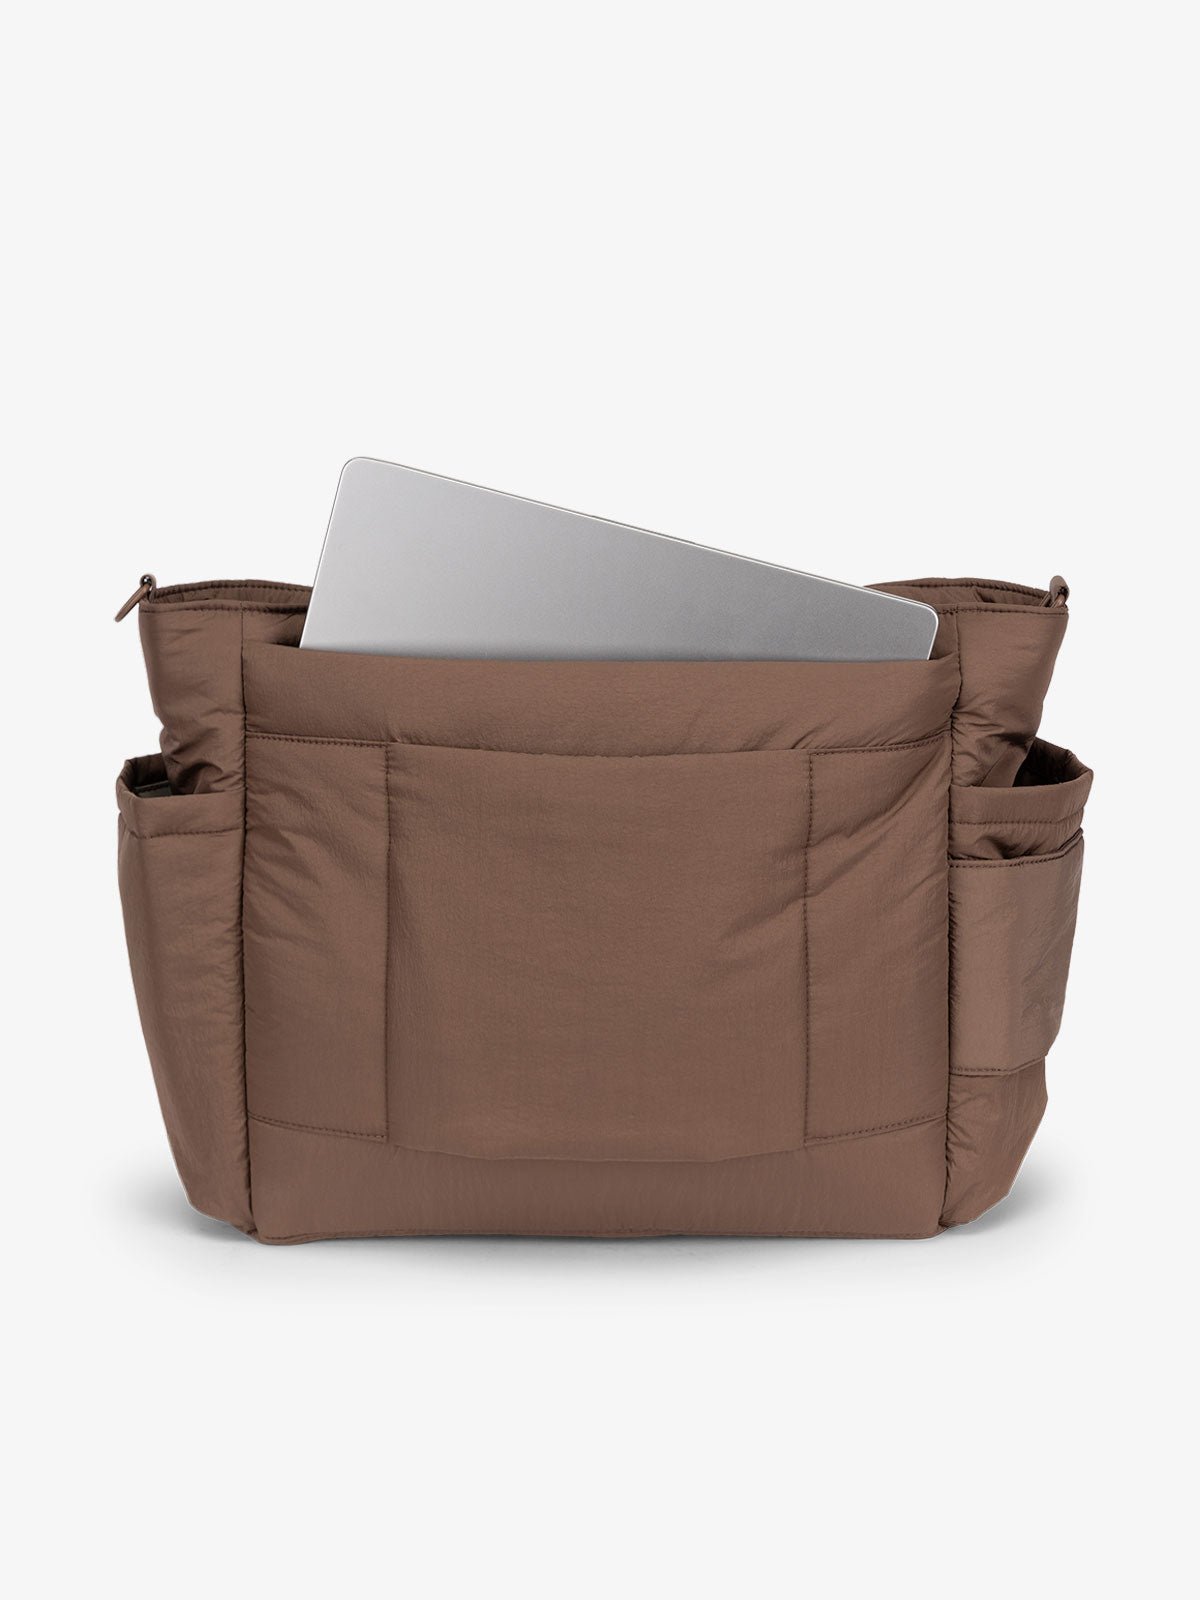 Hazelnut CALPAK laptop diaper tote bag with multiple insulated exterior bottle pockets and a spacious pocket for laptop or ipad